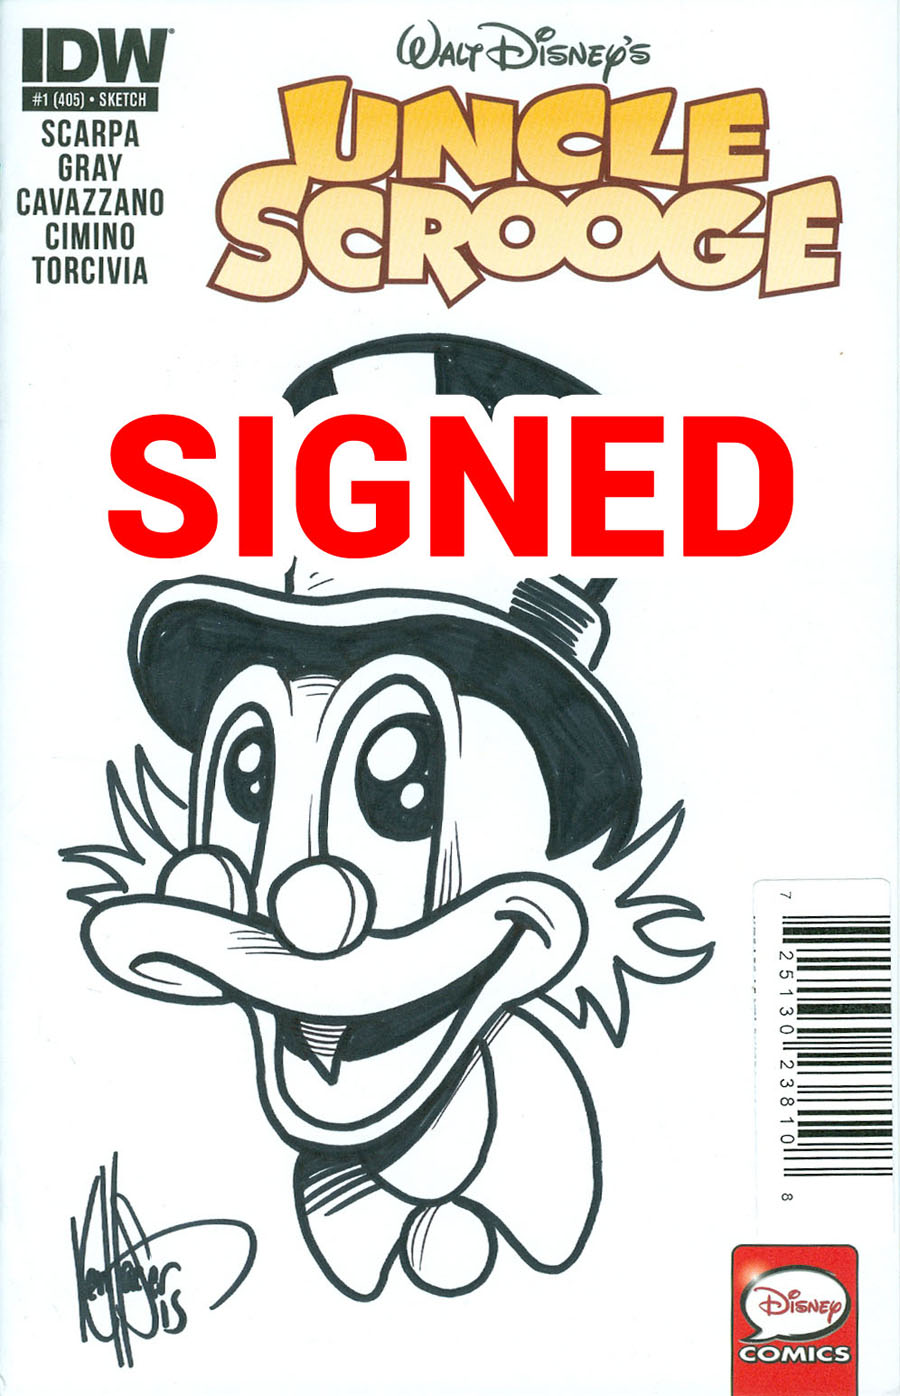 Uncle Scrooge Vol 2 #1 Cover E DF Ken Haeser Signed & Remarked With An Uncle Scrooge Hand-Drawn Sketch Variant Cover